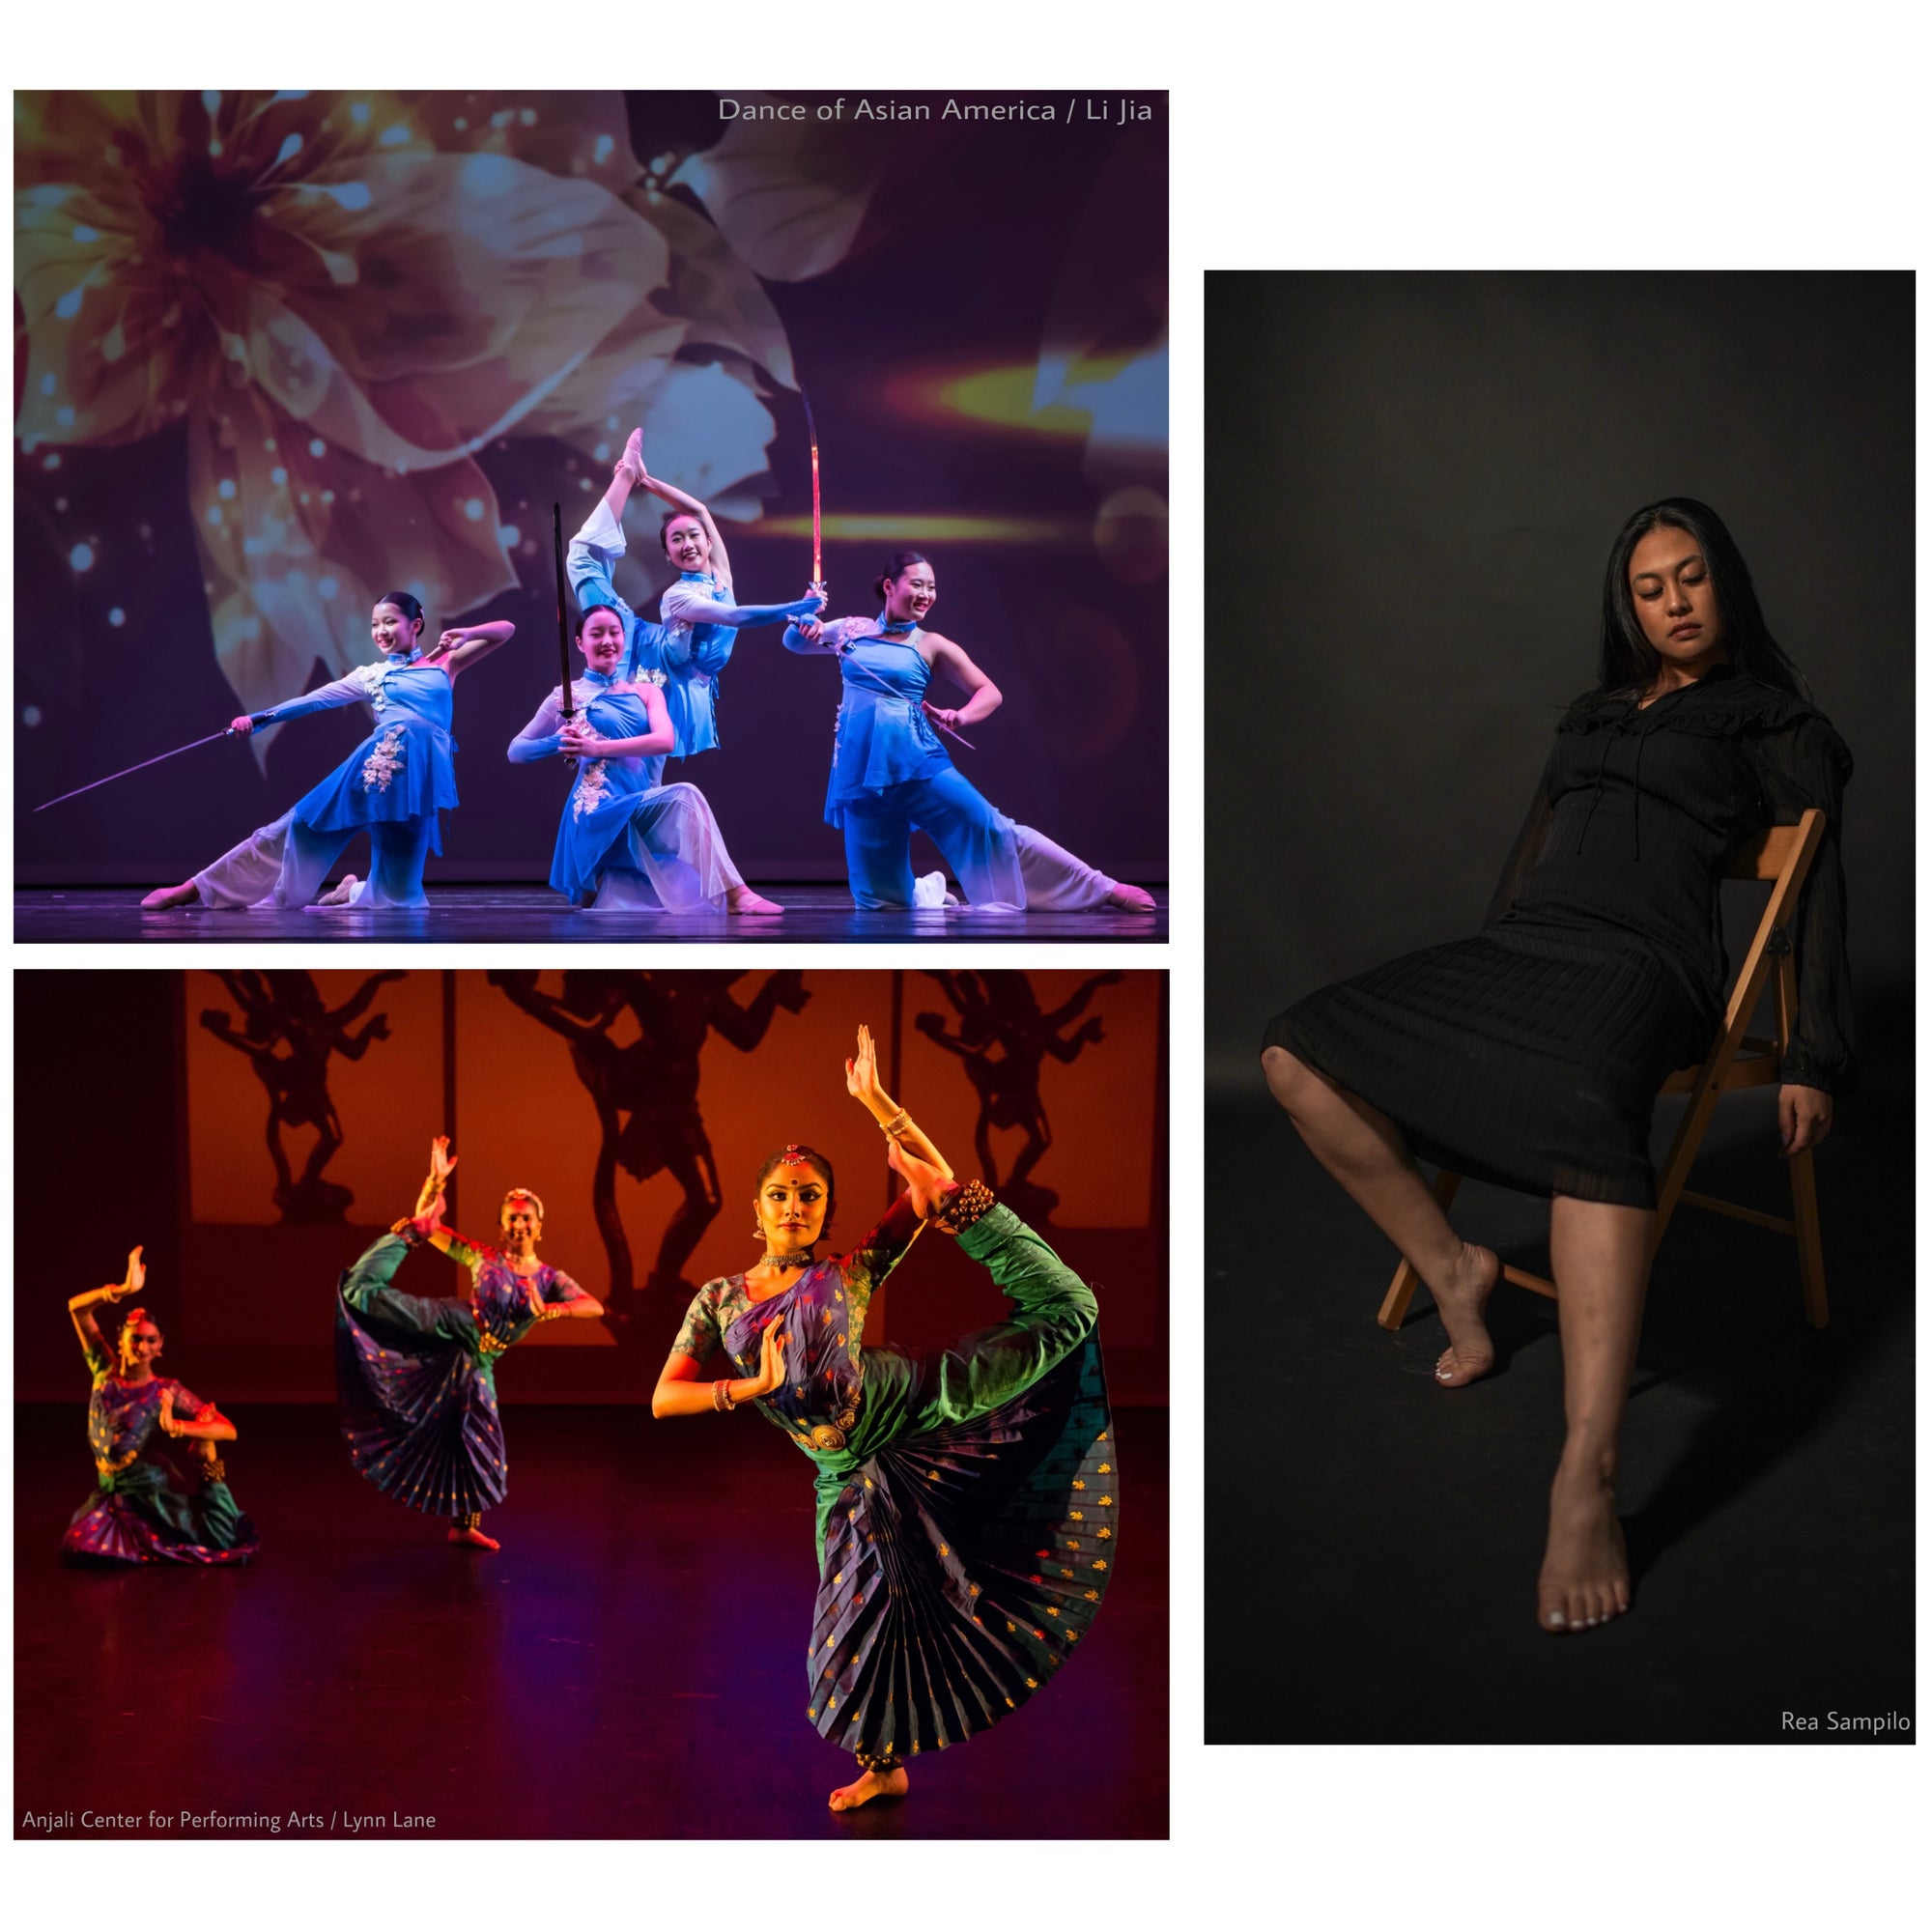 Collage of images: Dance of Asian America, Anjali Center for Performing Arts, and Rea Sampilo